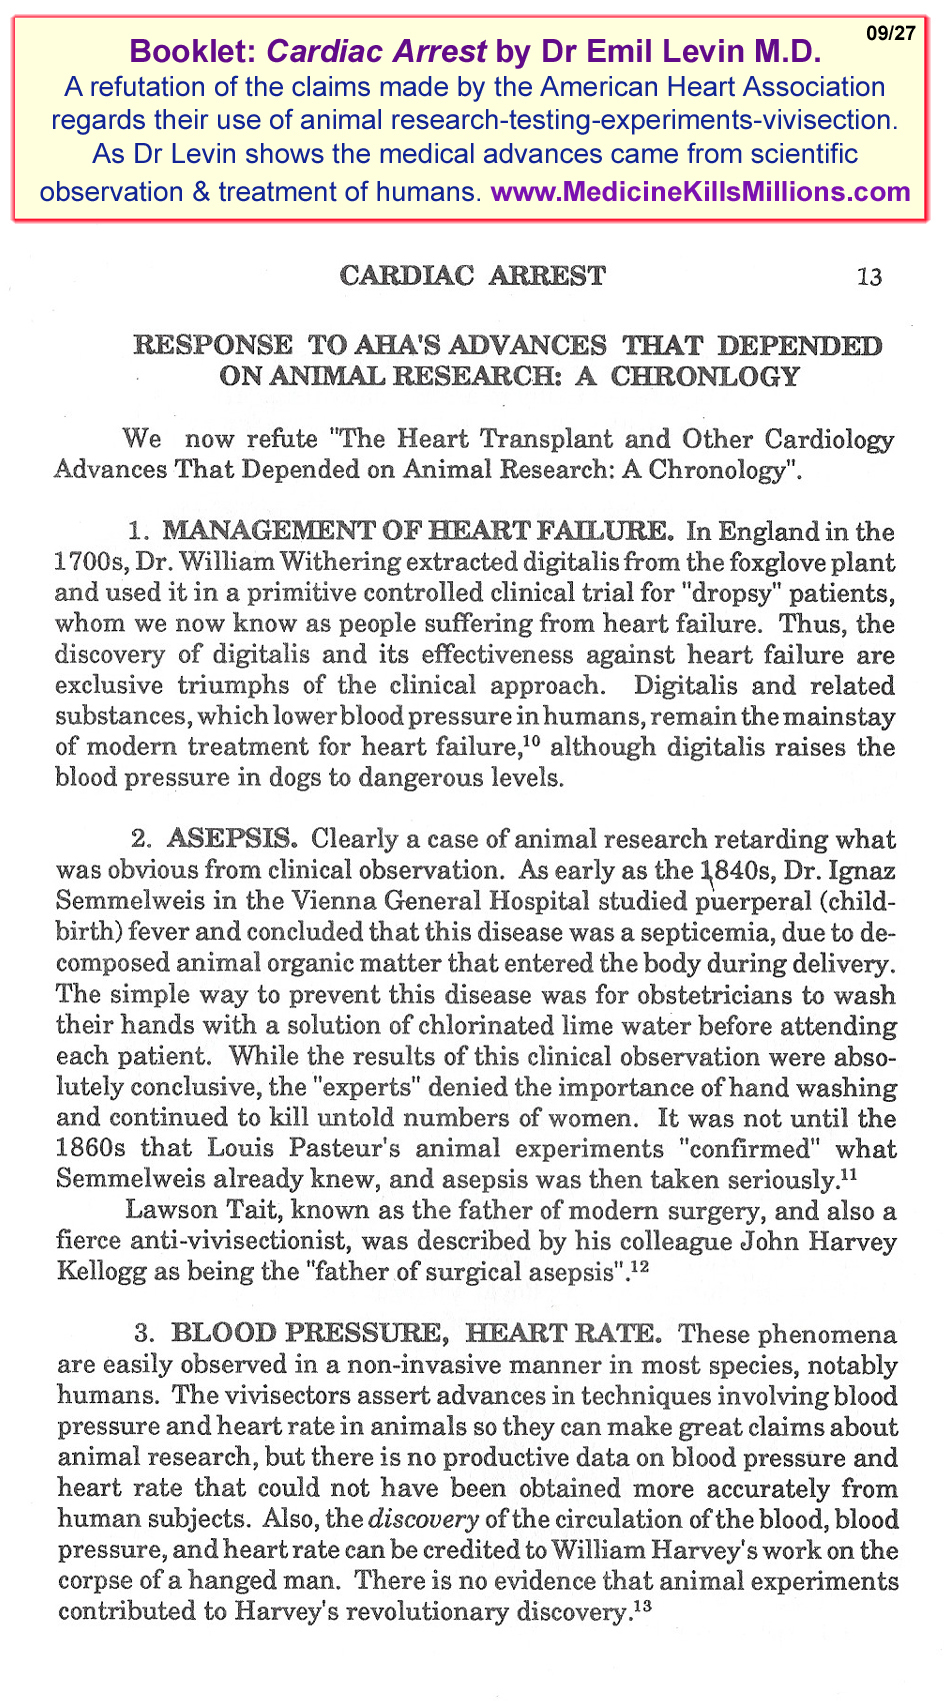 Cardiac-Arrest-09-Rebuttal-of-Claims-by-American-Heart-Association-About-Animal-Research-Testing-Experiments.jpg